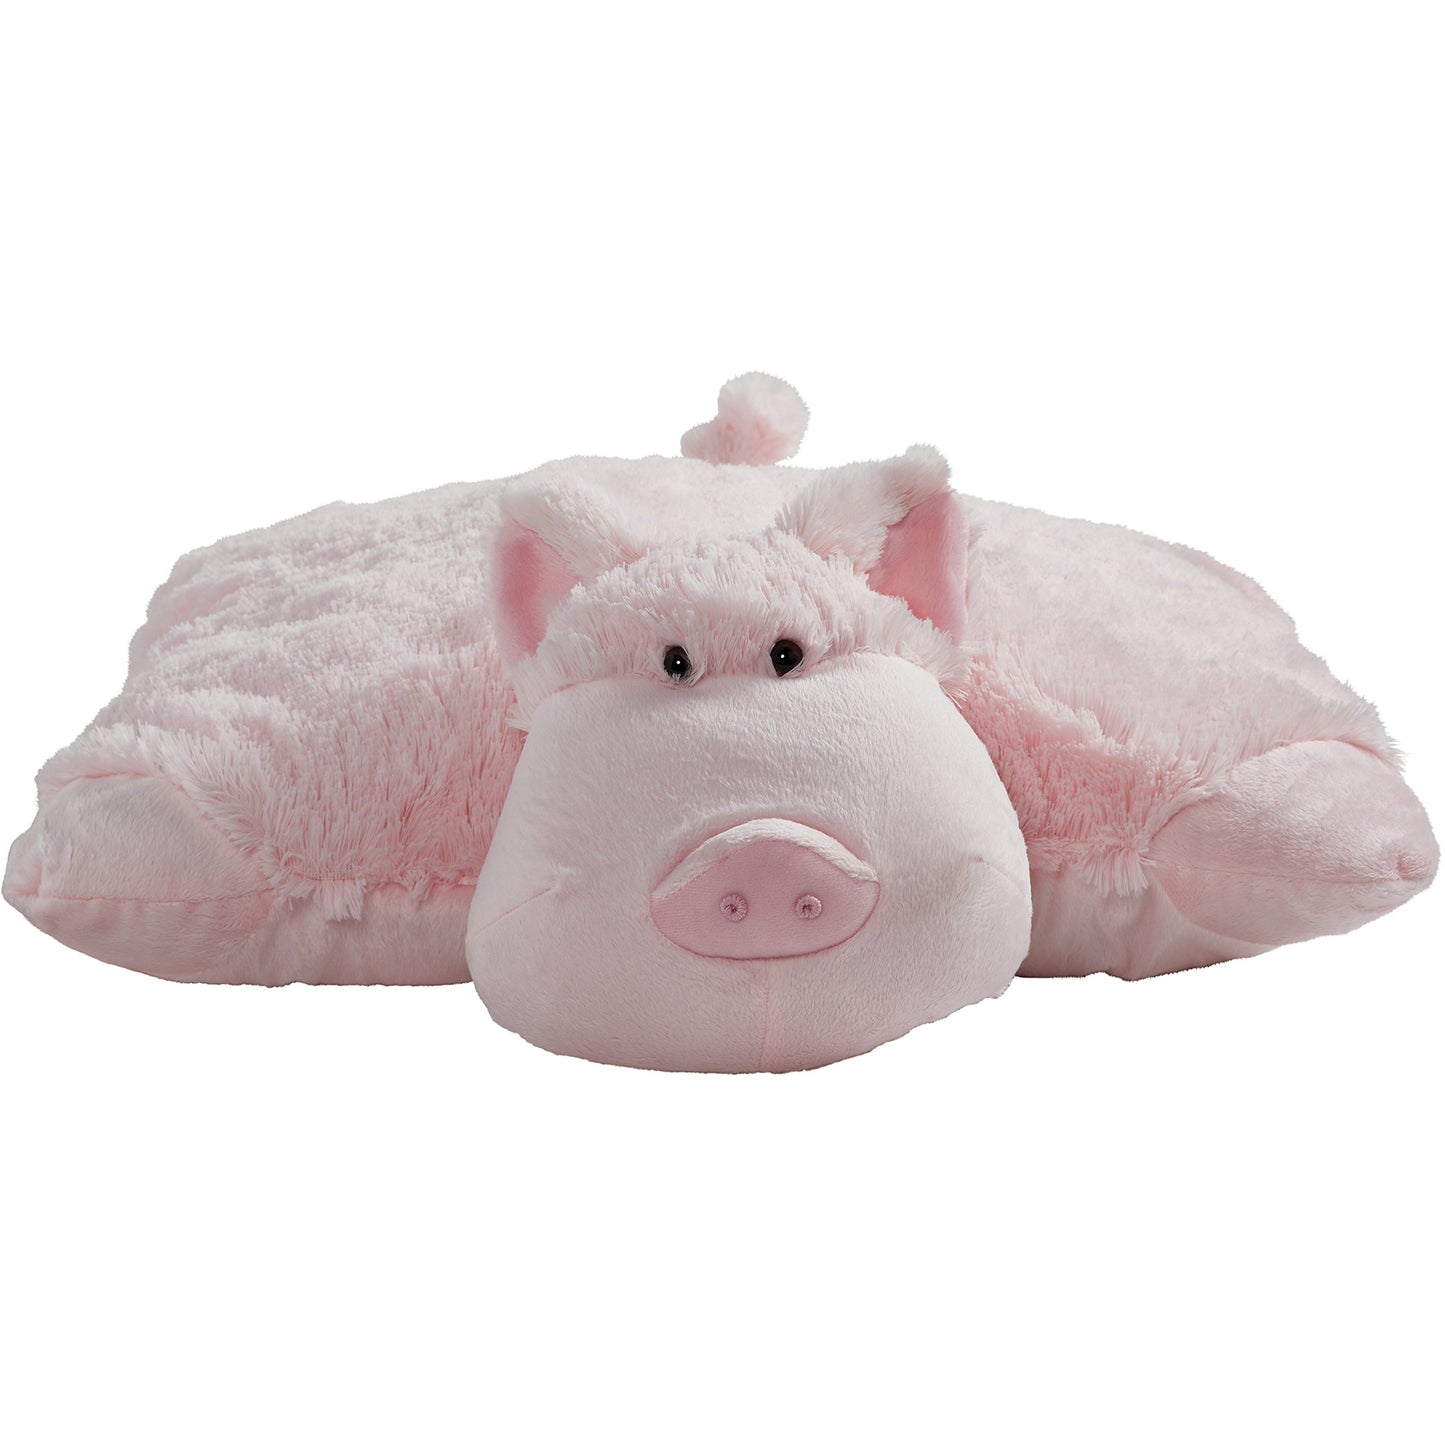 Pillow Pets Originals, Wiggly Pig, 18" Stuffed Animal Plush Toy , White